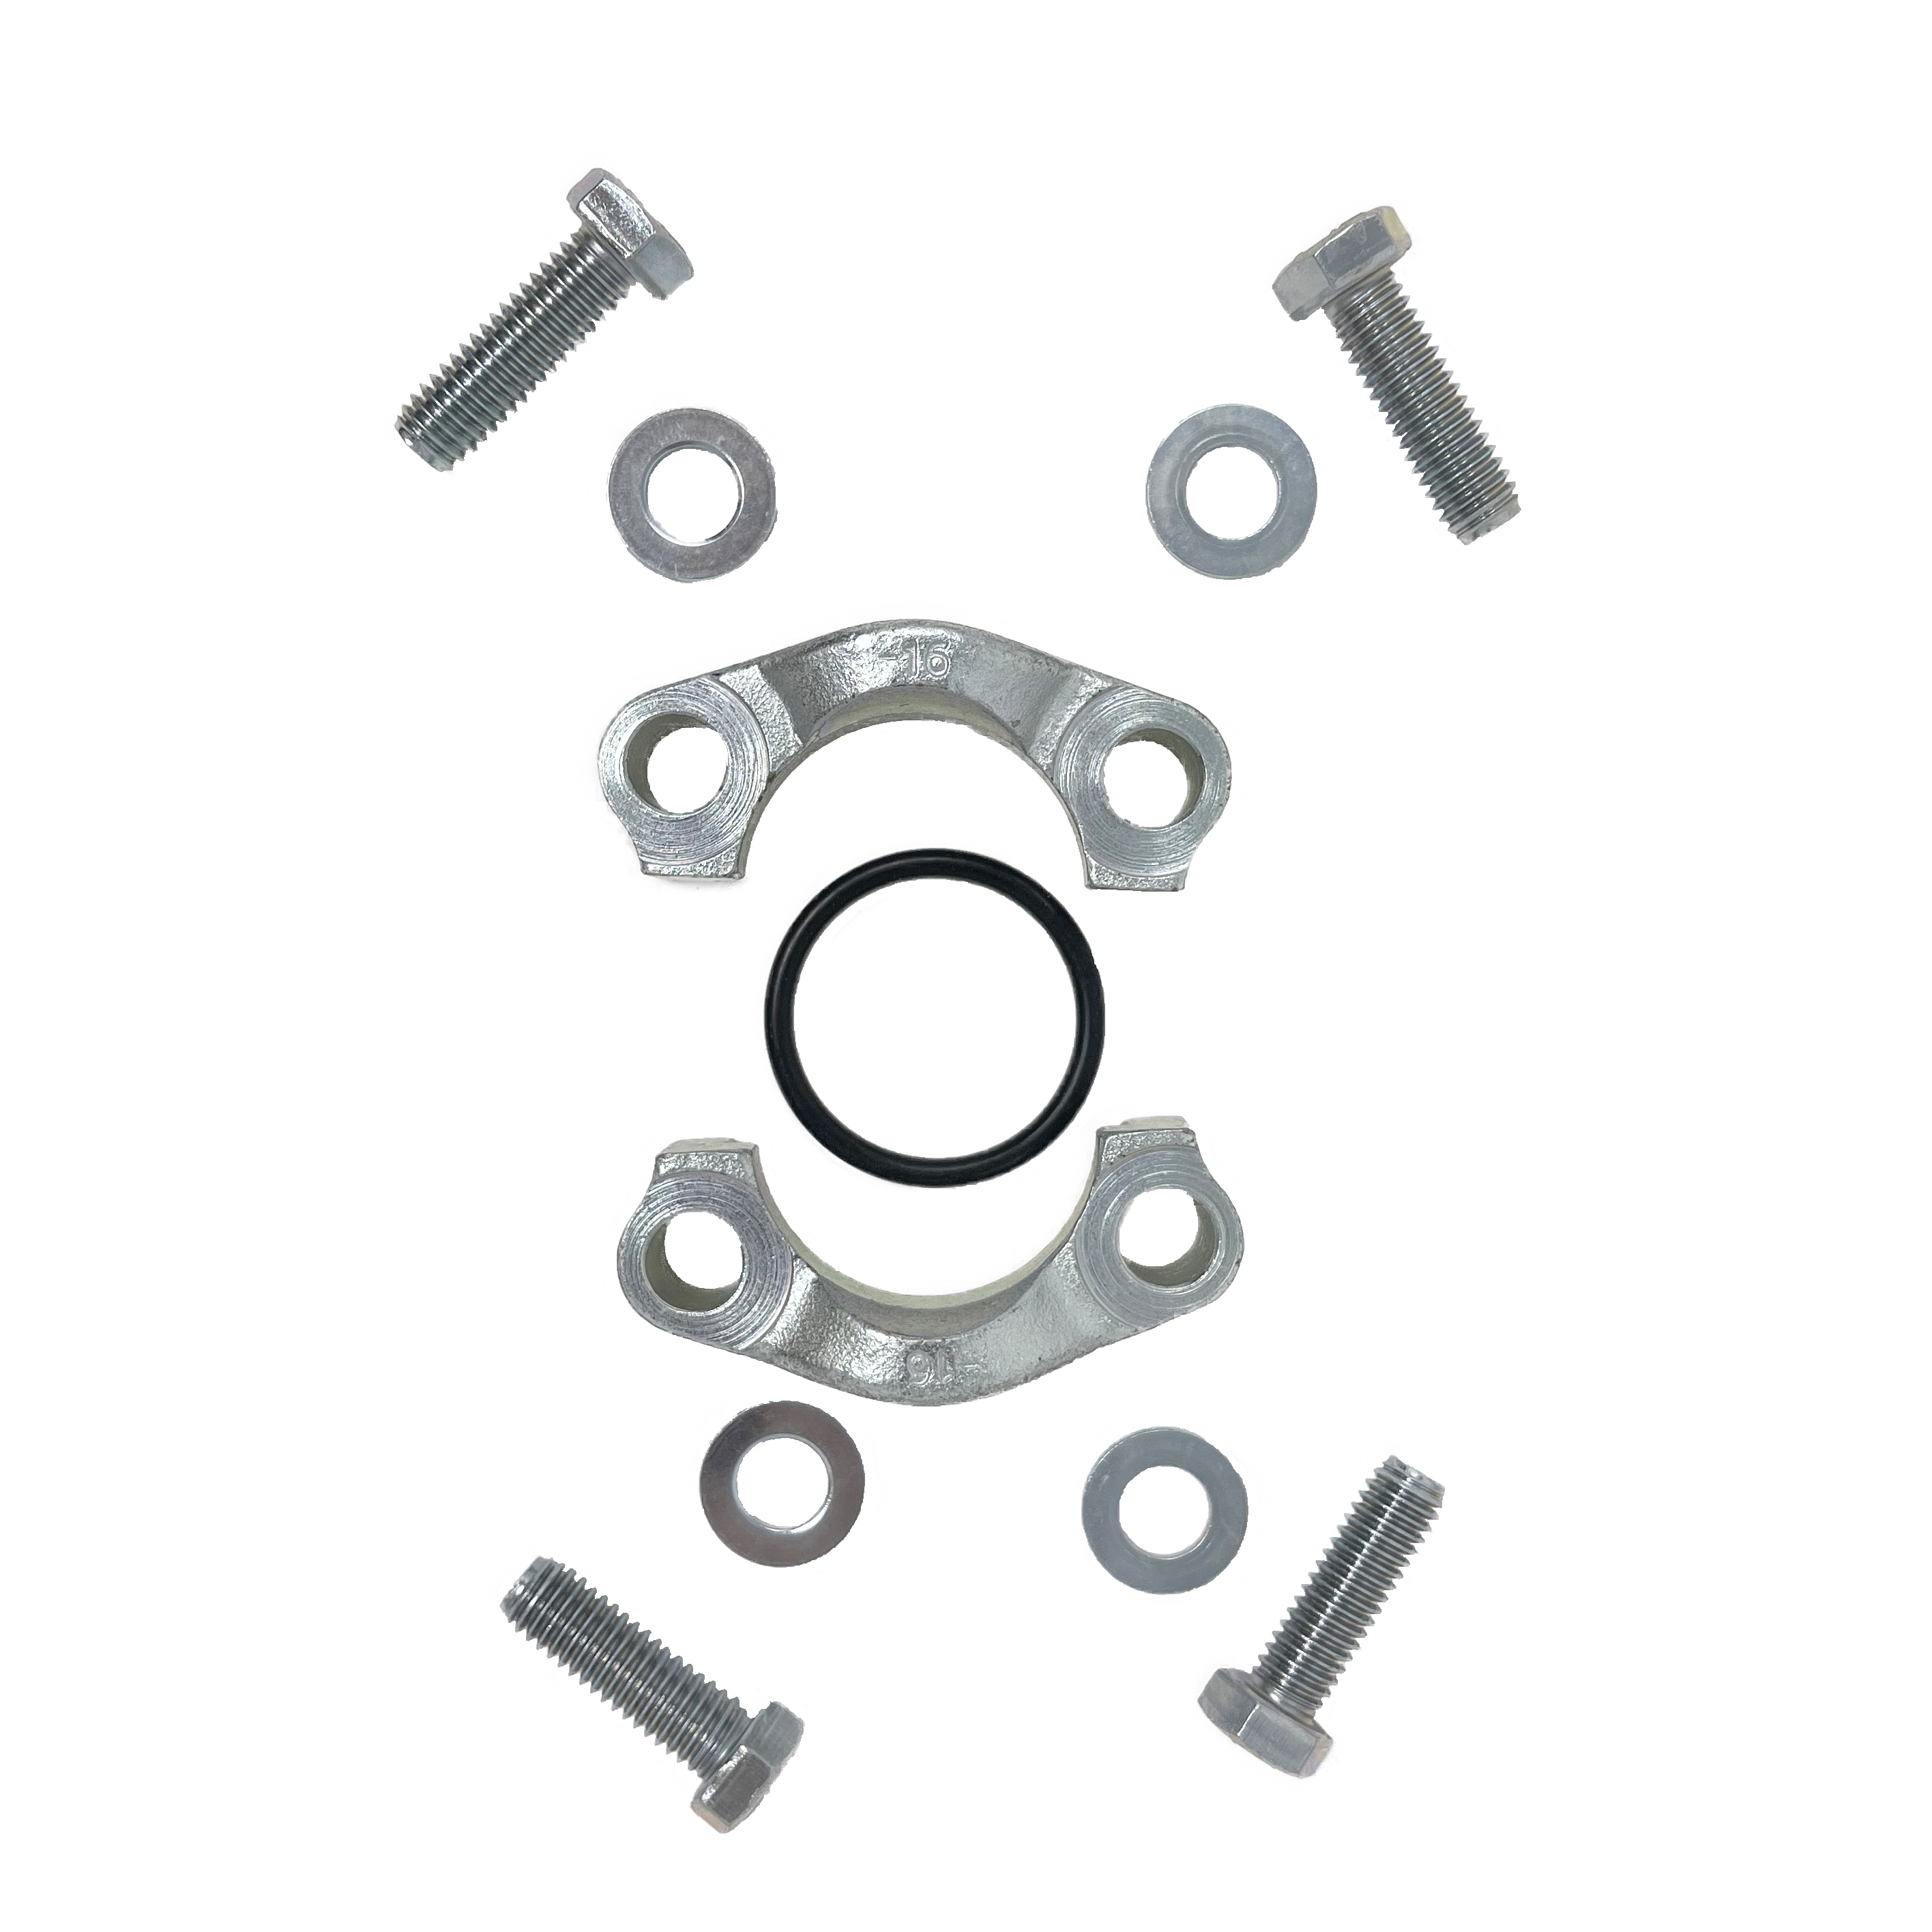 32SFO : AFP Split Flange Kit, Steel, 2" Code 61, 3000psi, Includes two (2) halves, four (4) bolts, four (4) washers, and one (1) O-Ring